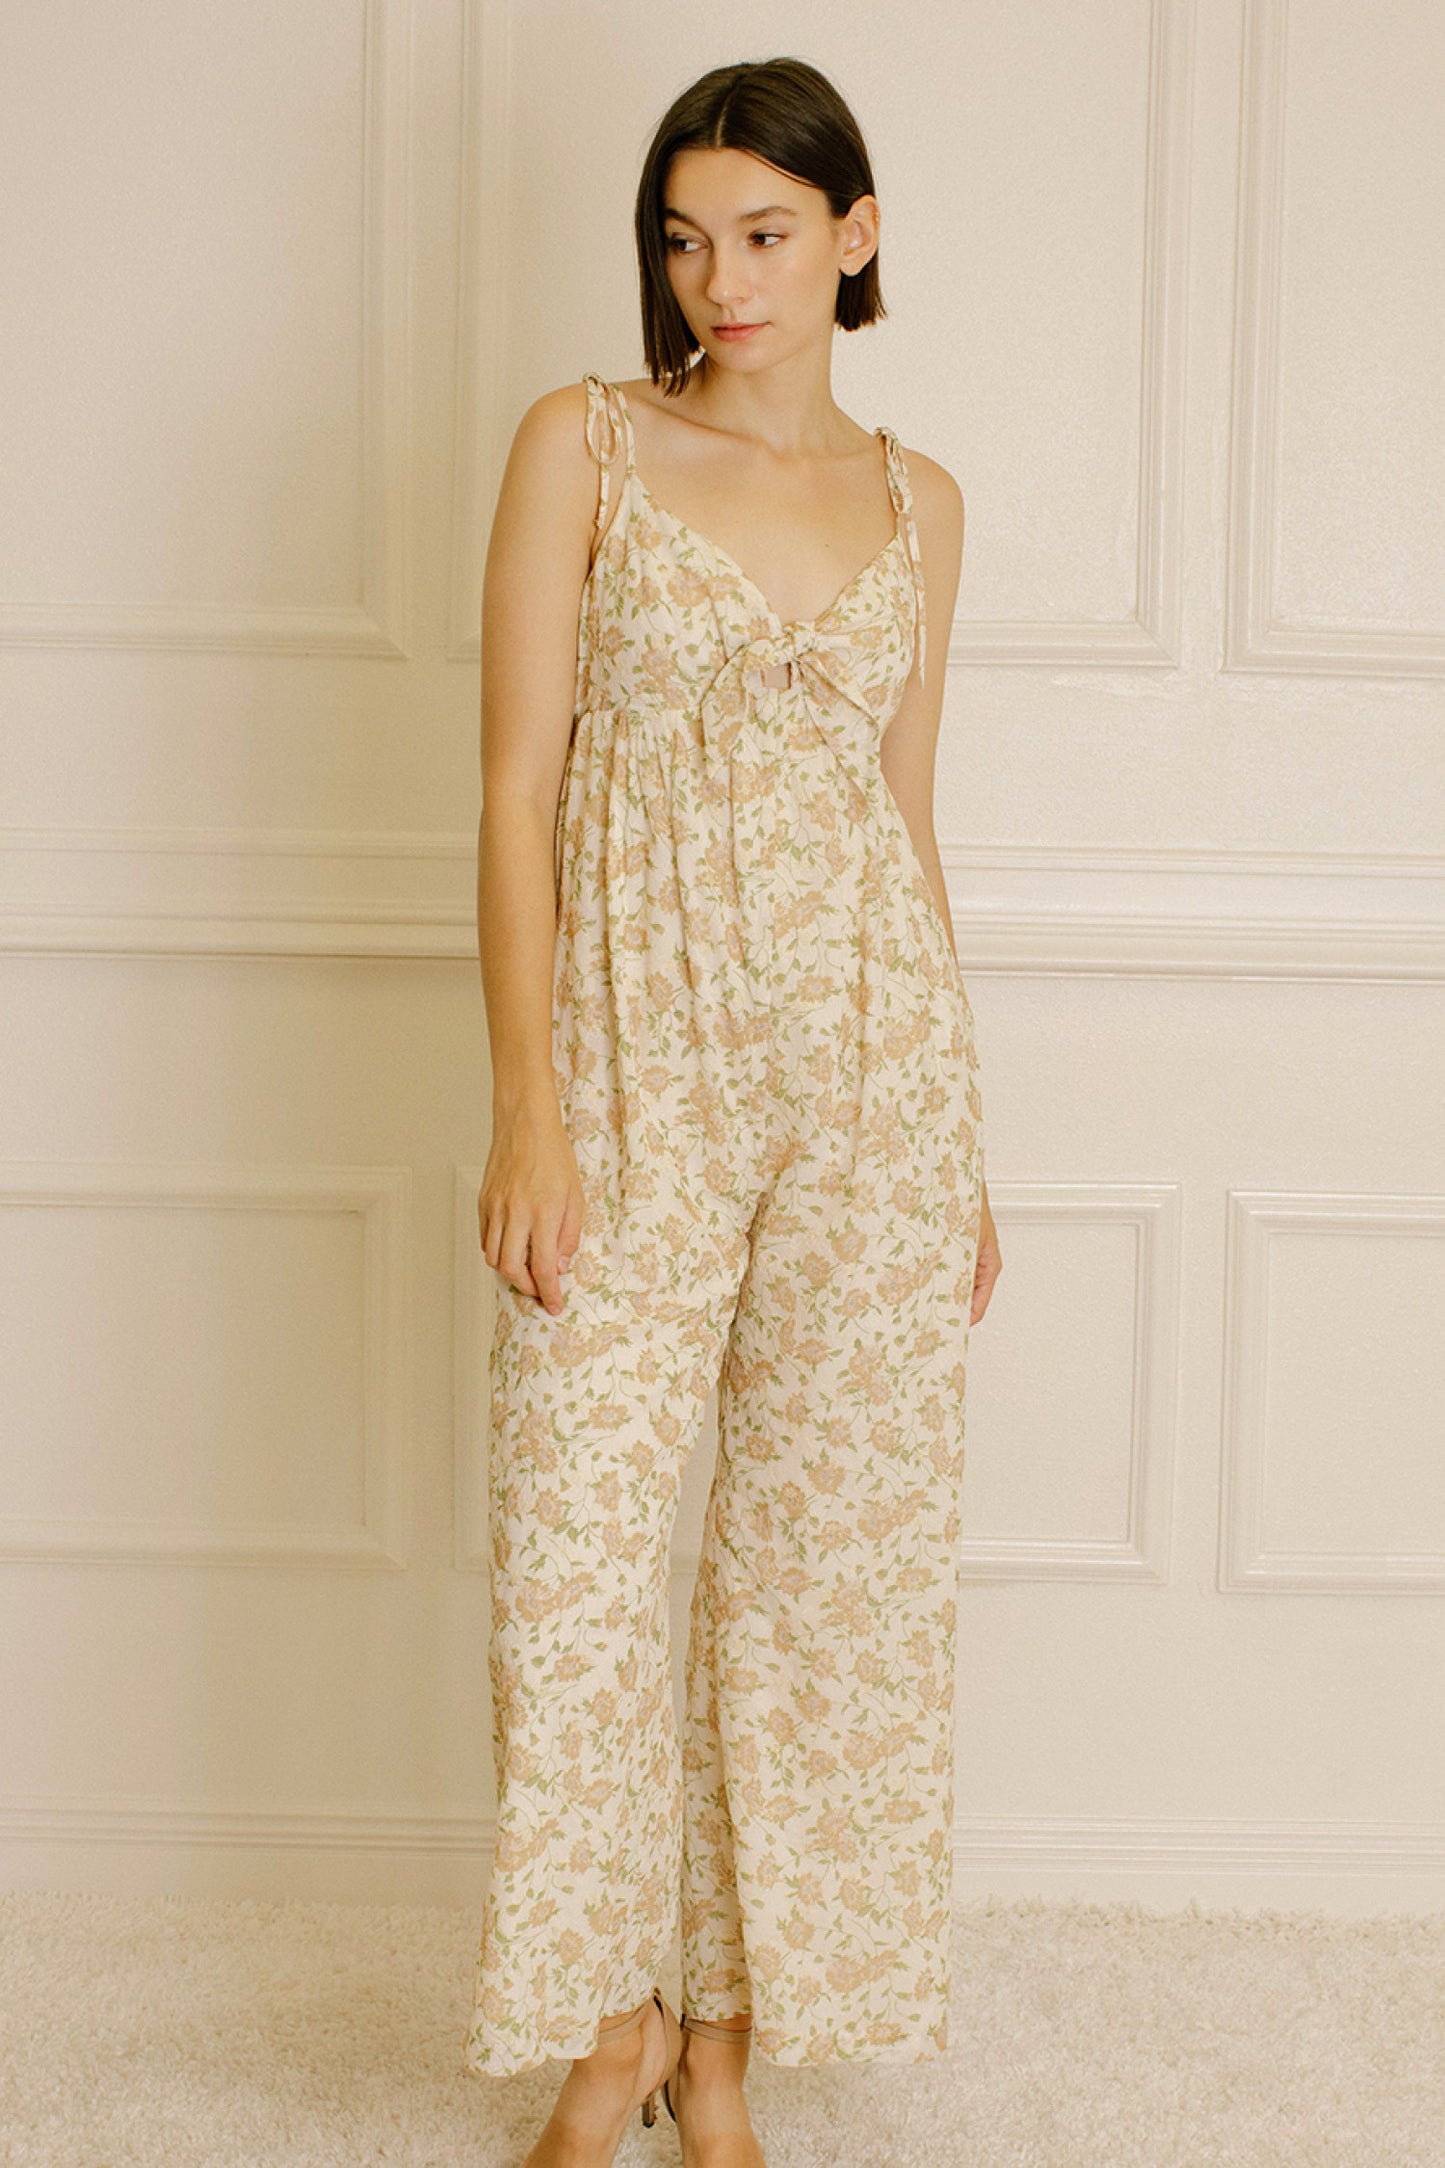 All Too Well Jumpsuit